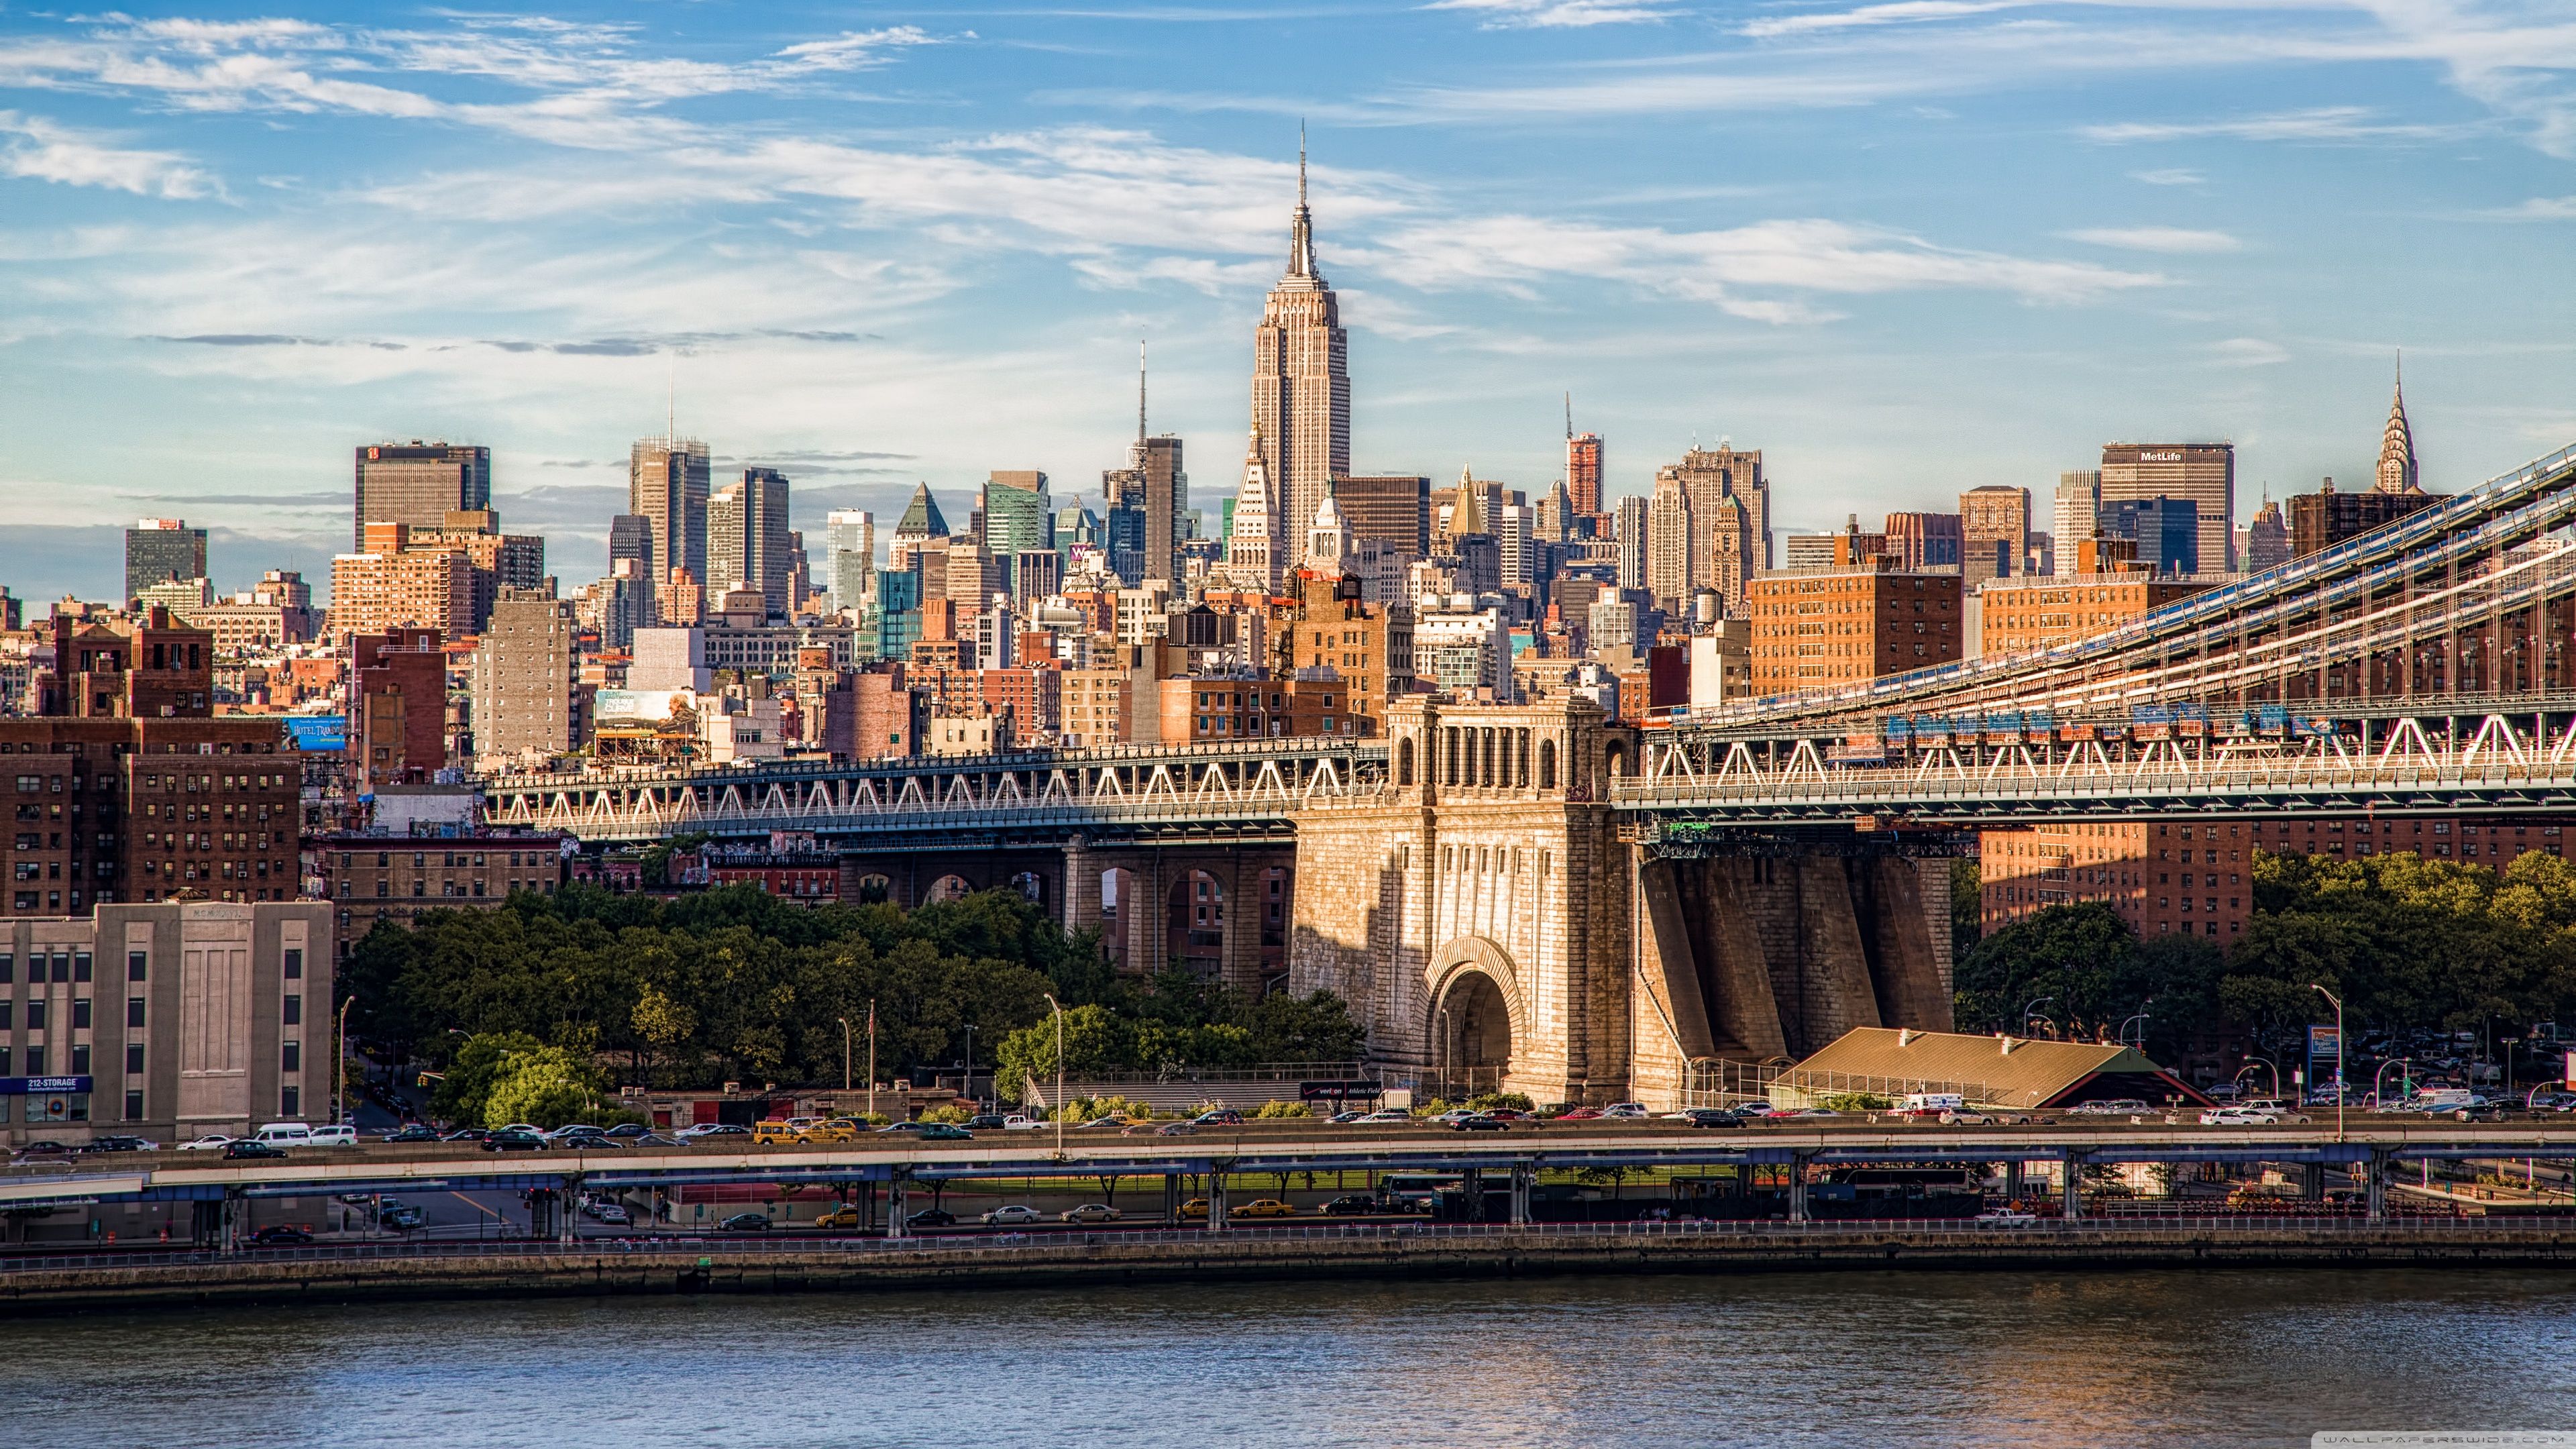 3840x2160 Manhattan 4k Wallpaper For Your Desktop Or Mobile Screen Free And Easy To Download